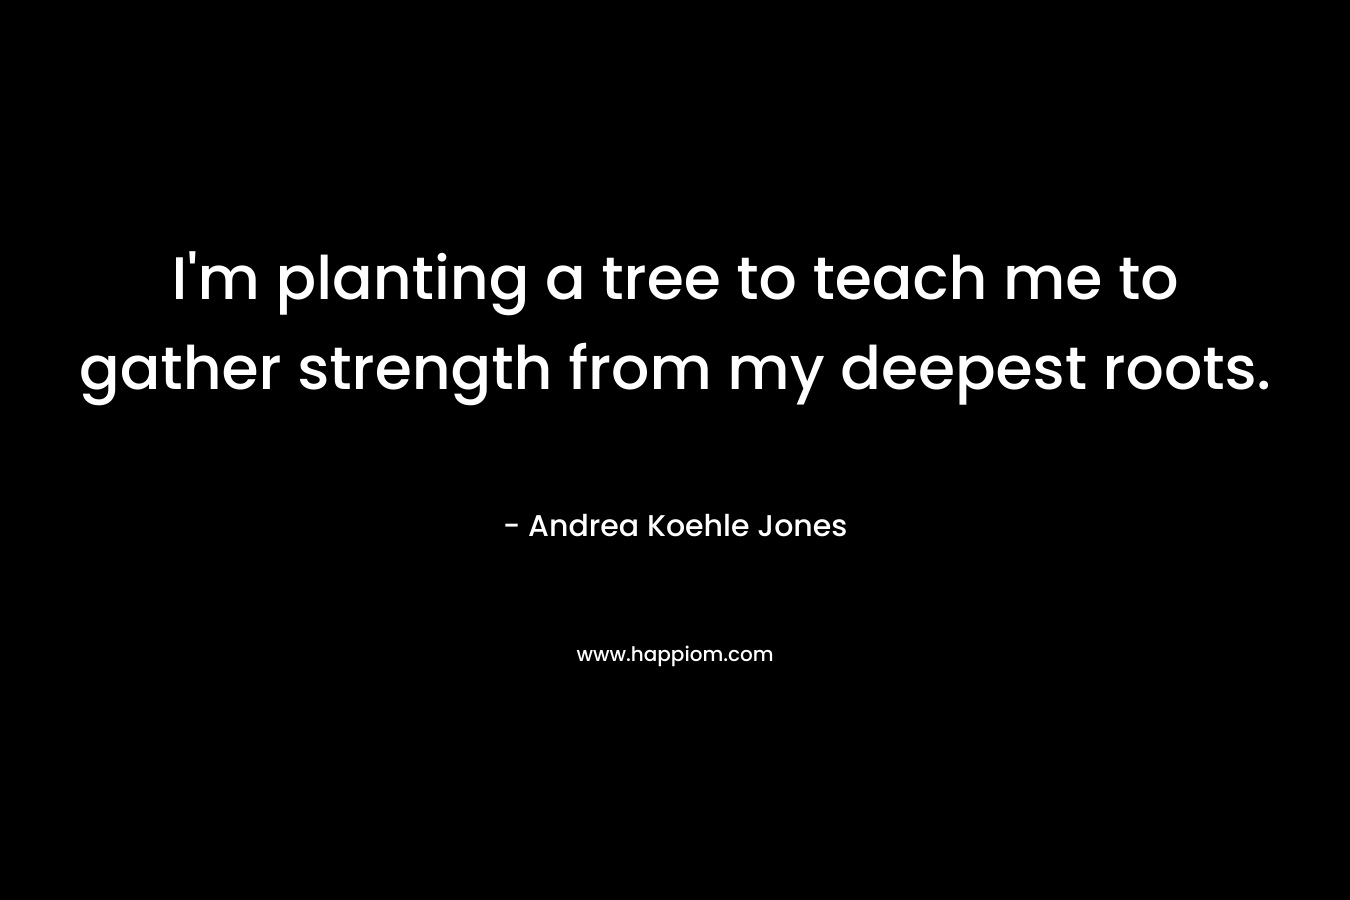 I'm planting a tree to teach me to gather strength from my deepest roots.